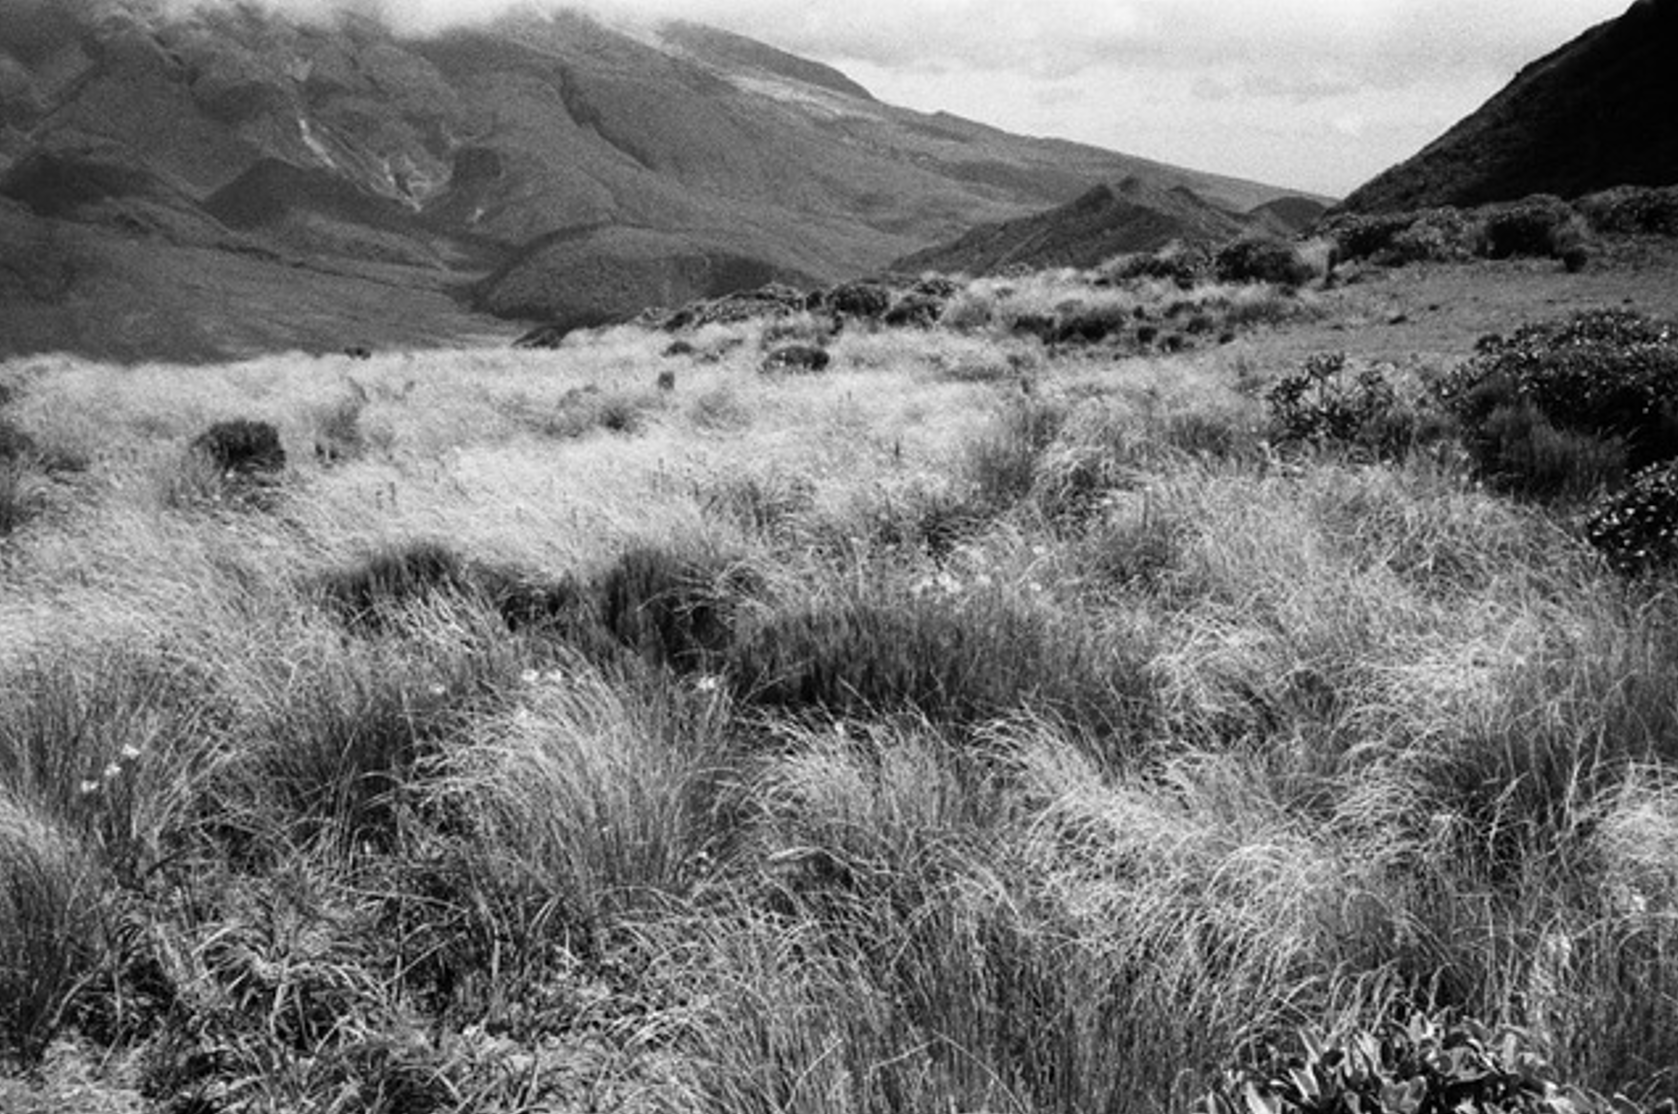 black and white photo of grassy landscape, hills in the background